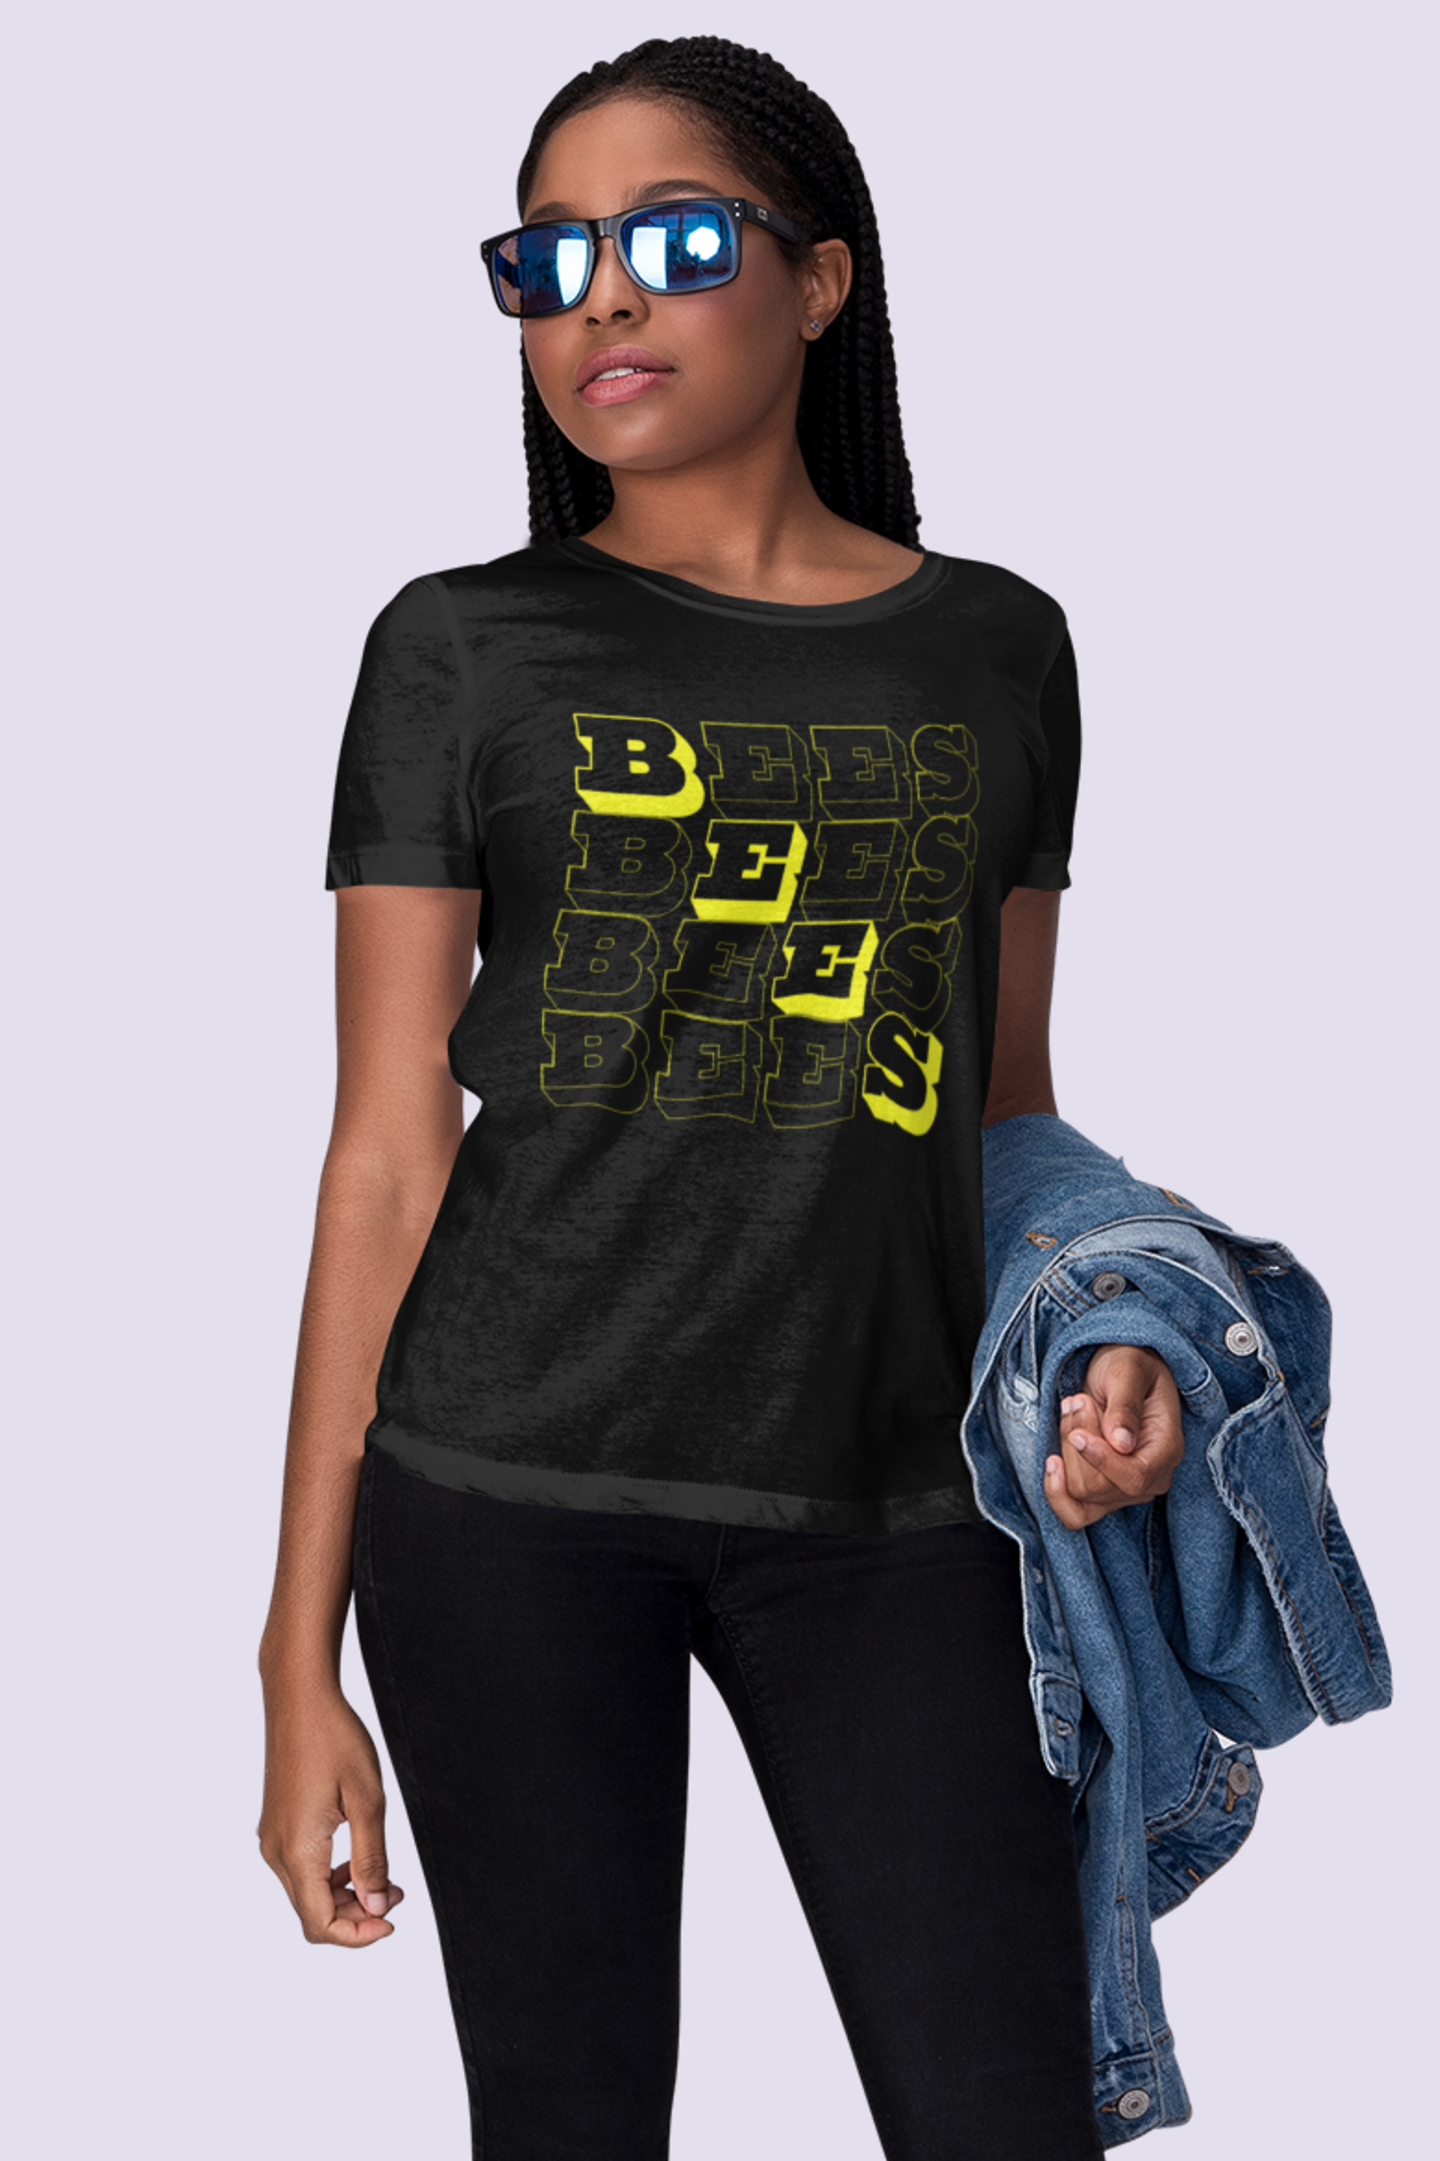 model wearing black tshirt with bees block text graphic design